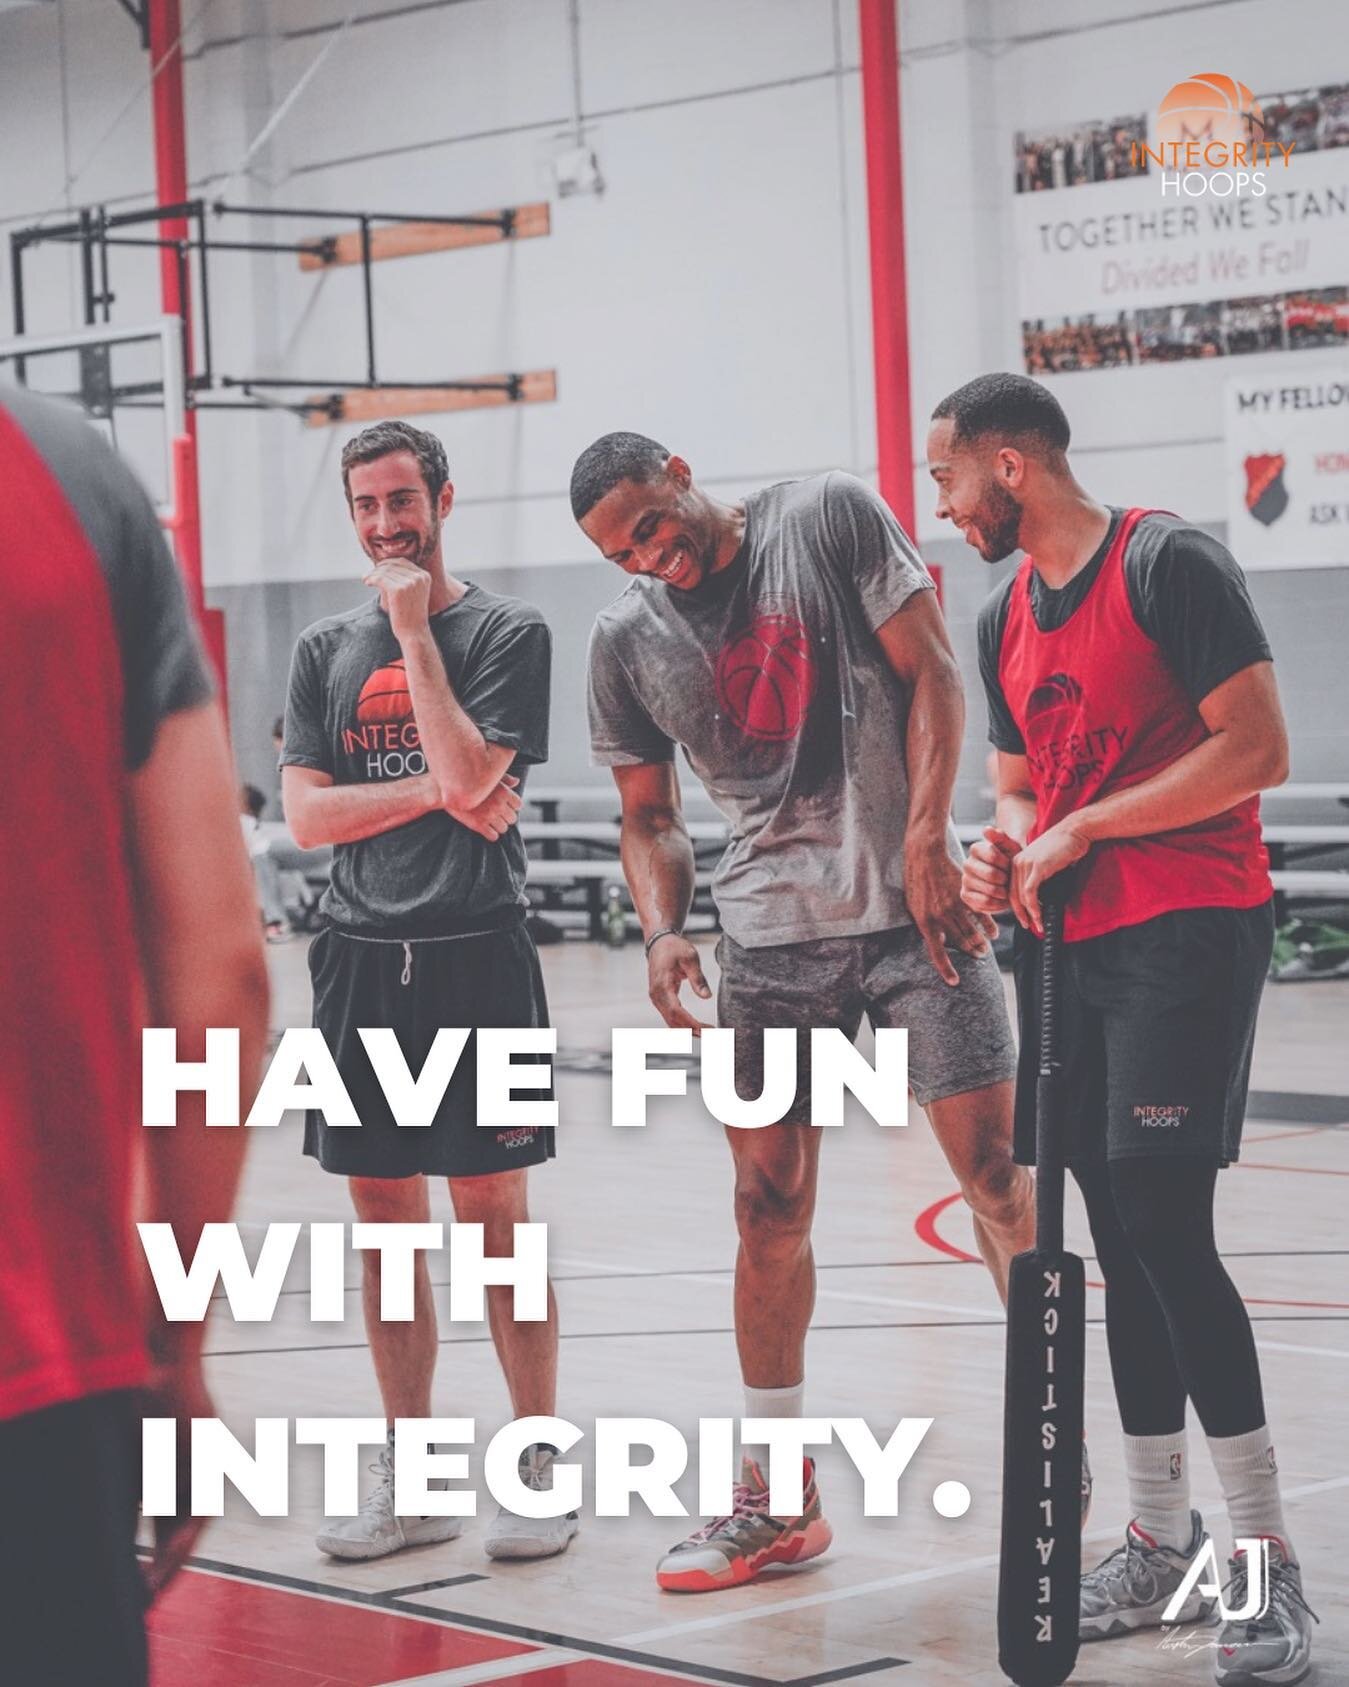 Get your Integrity Hoops Merch and #HaveFunWithIntegrity. 

🏀 integrityhoops.com